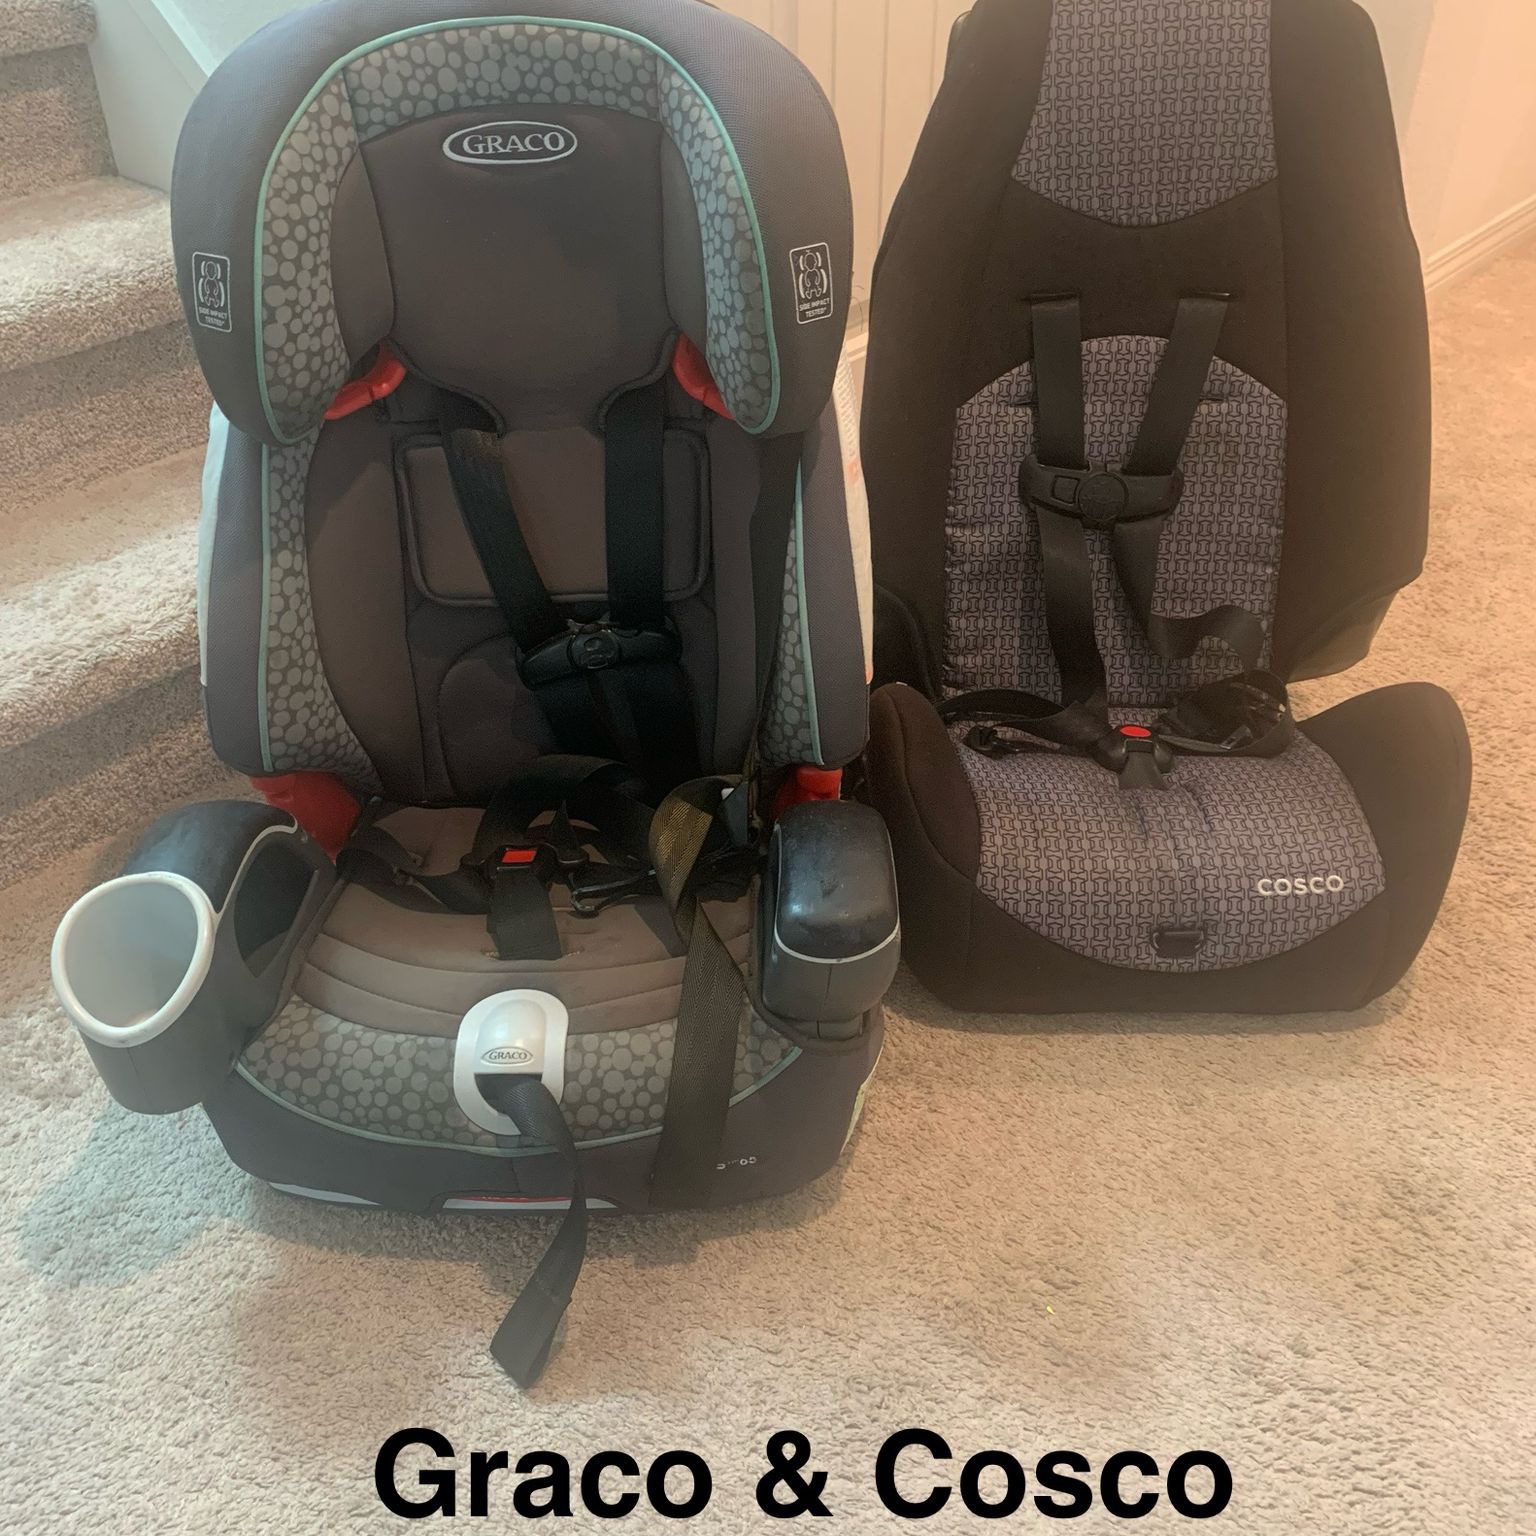 Baby Stroller + Baby Products Combo For Sale- All Included  $350